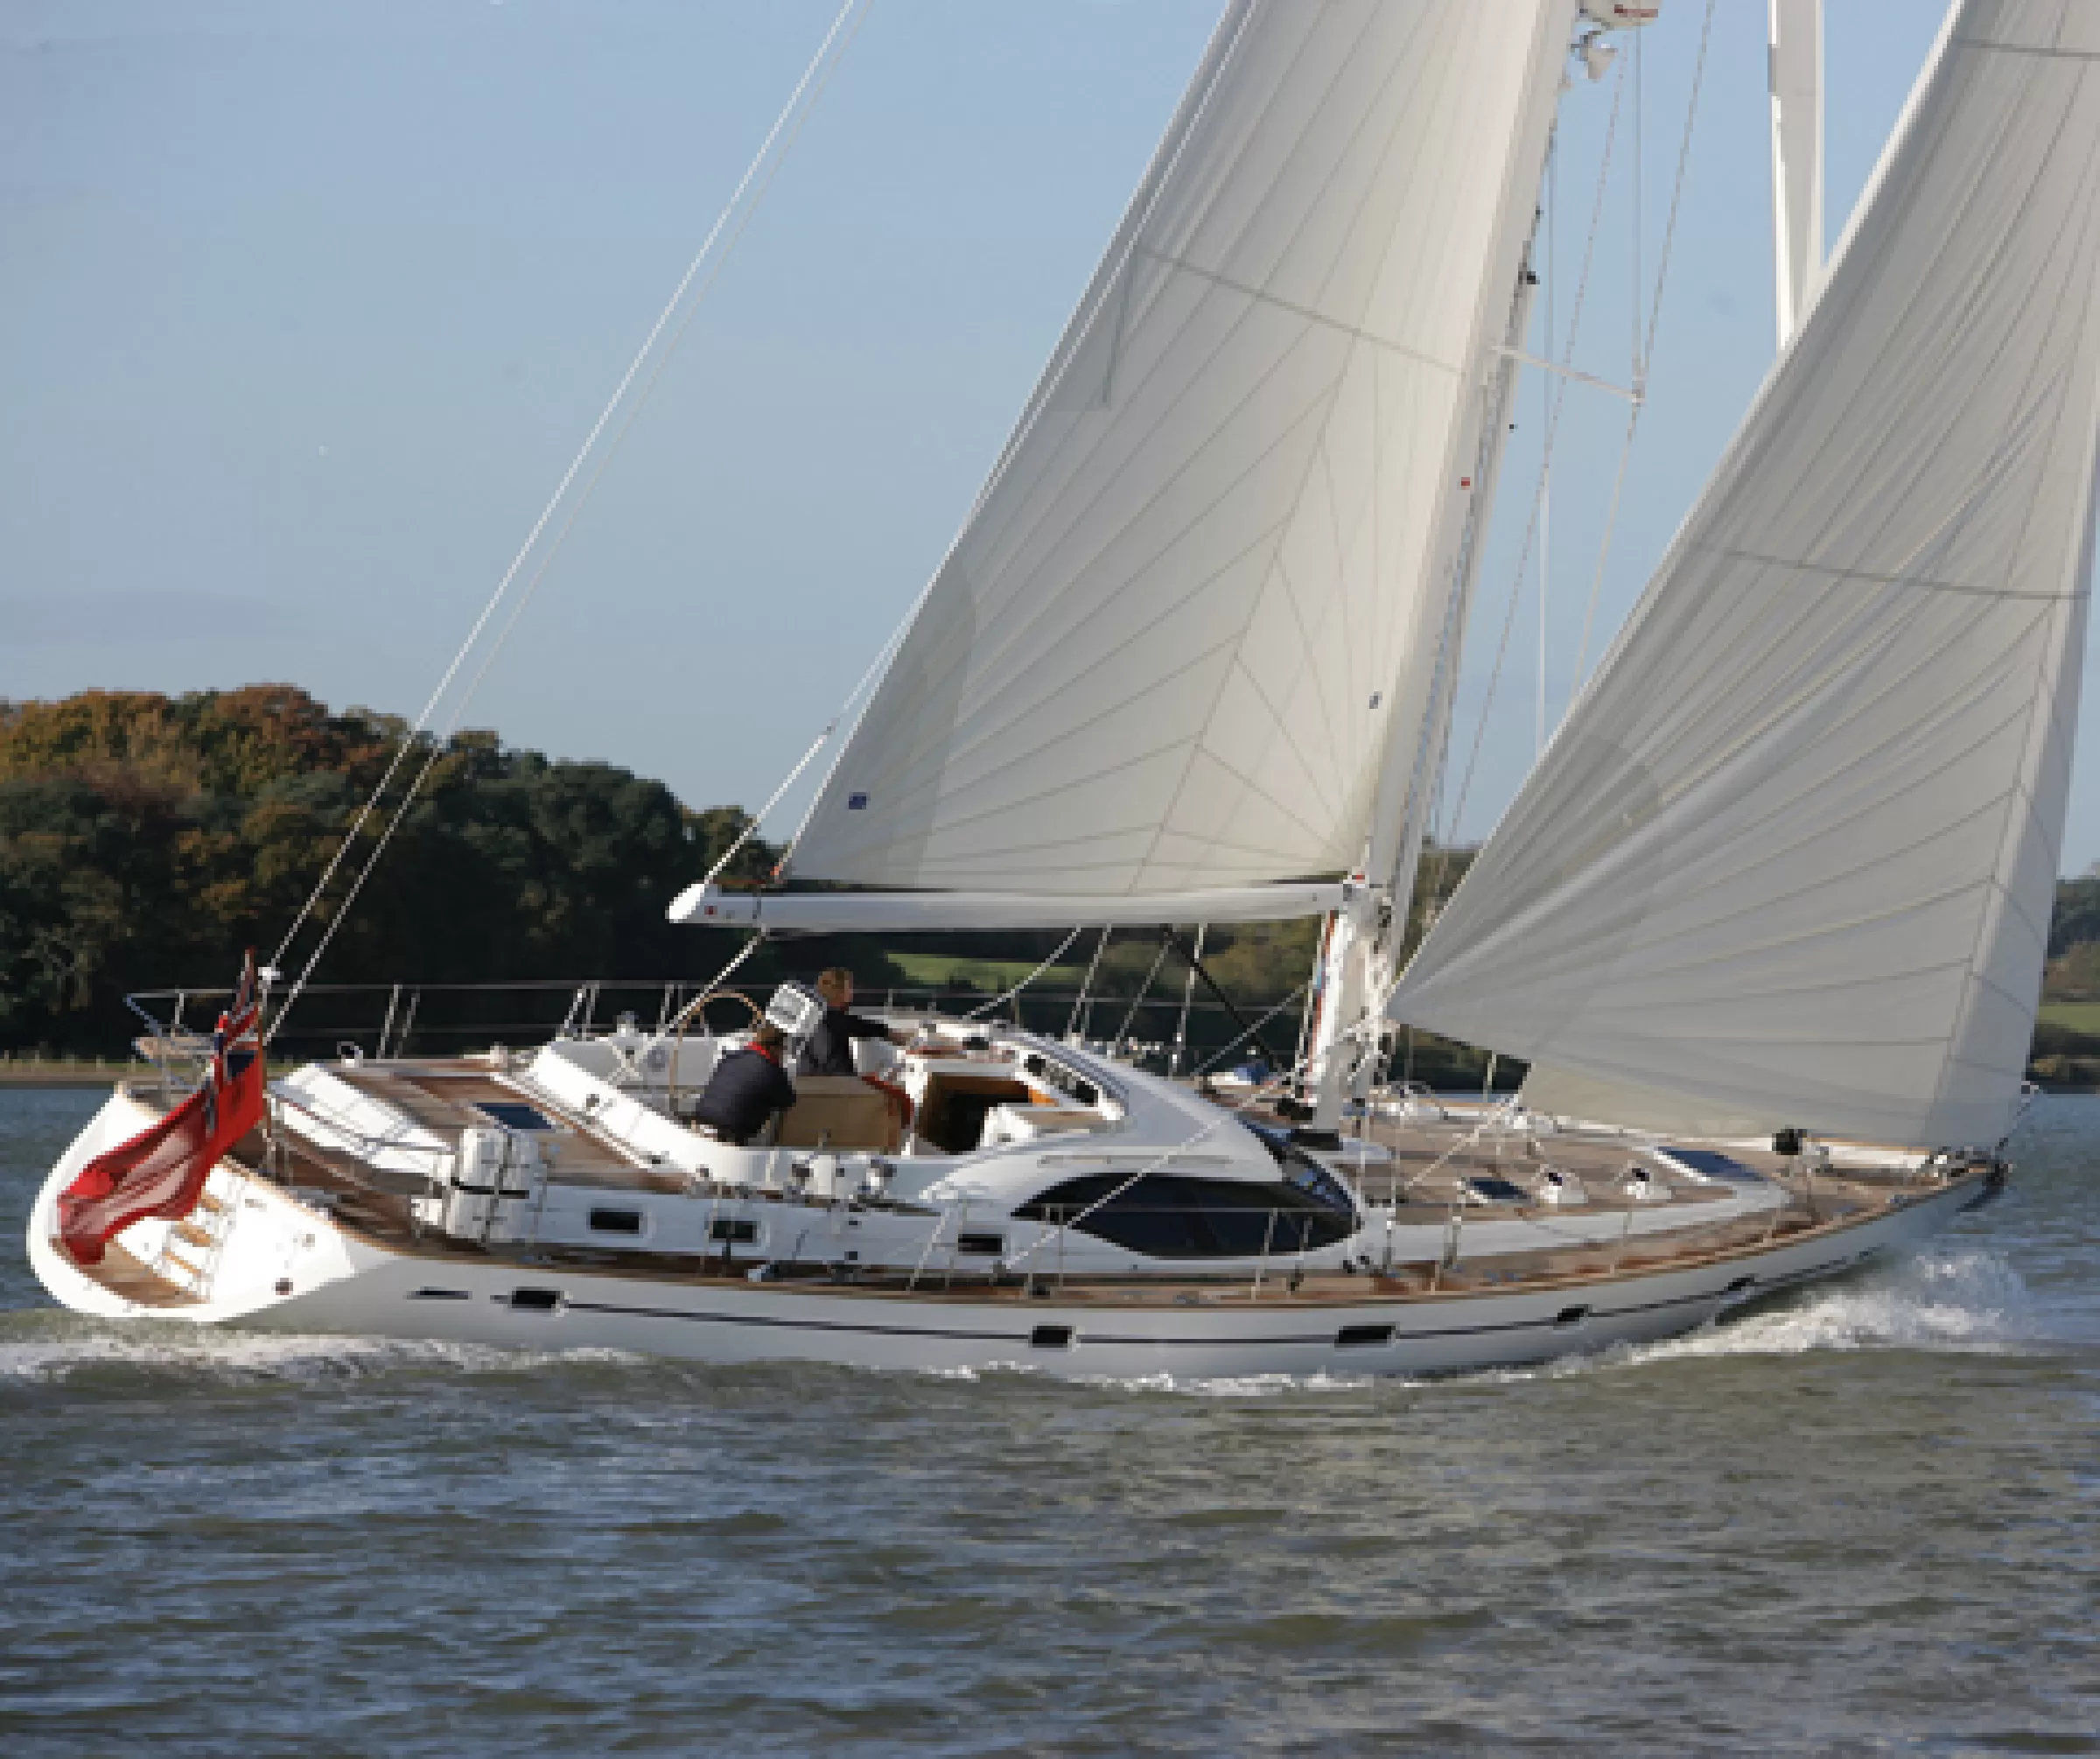 56' oyster sailboat